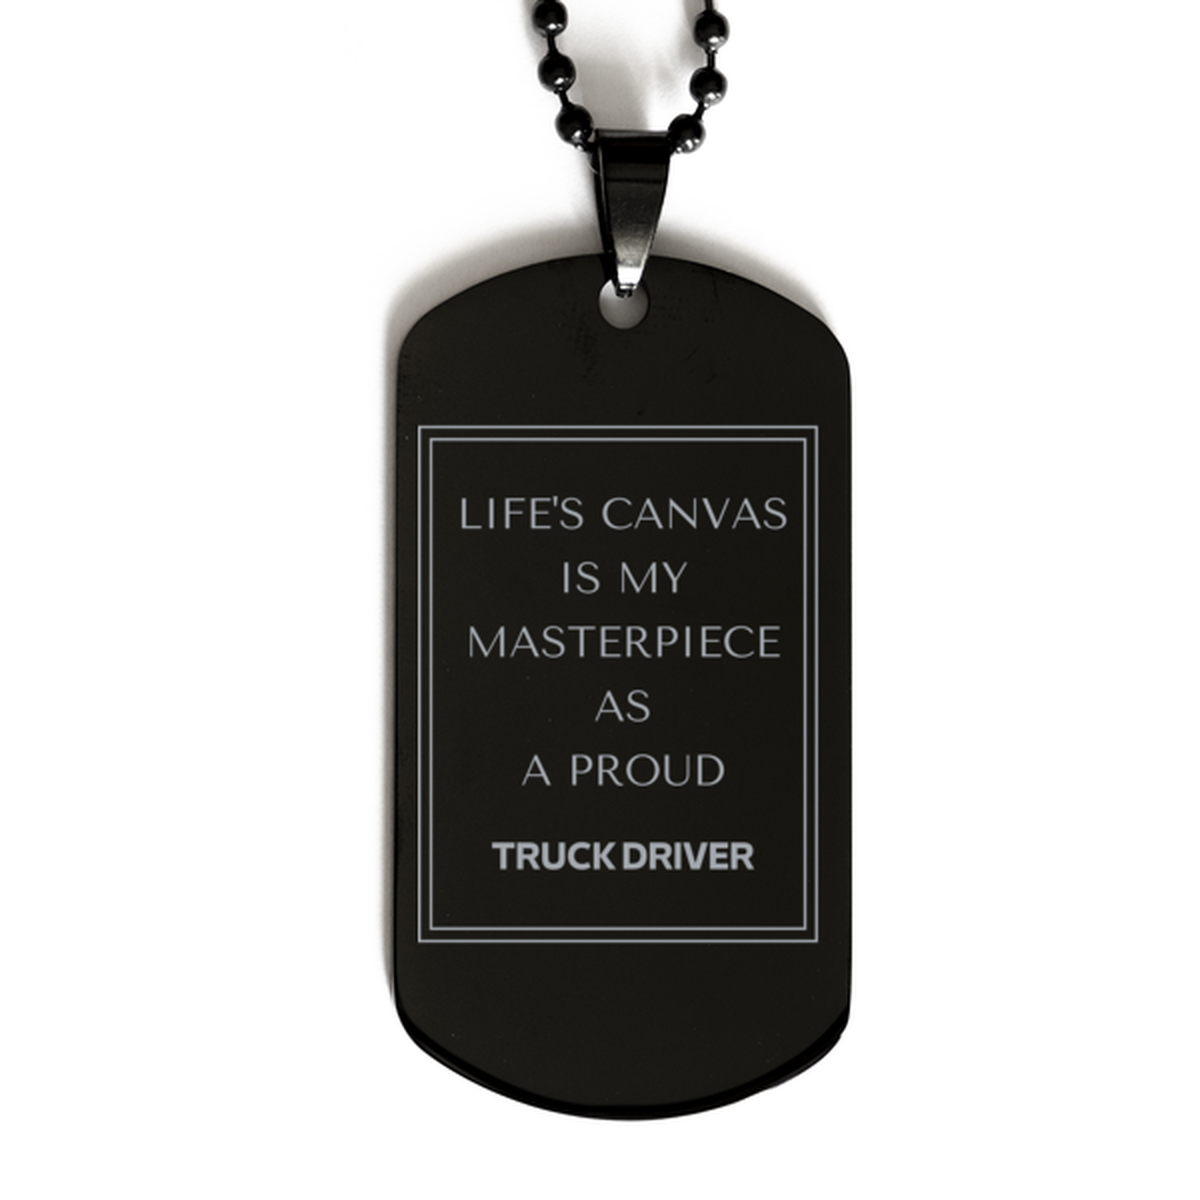 Proud Truck Driver Gifts, Life's canvas is my masterpiece, Epic Birthday Christmas Unique Black Dog Tag For Truck Driver, Coworkers, Men, Women, Friends